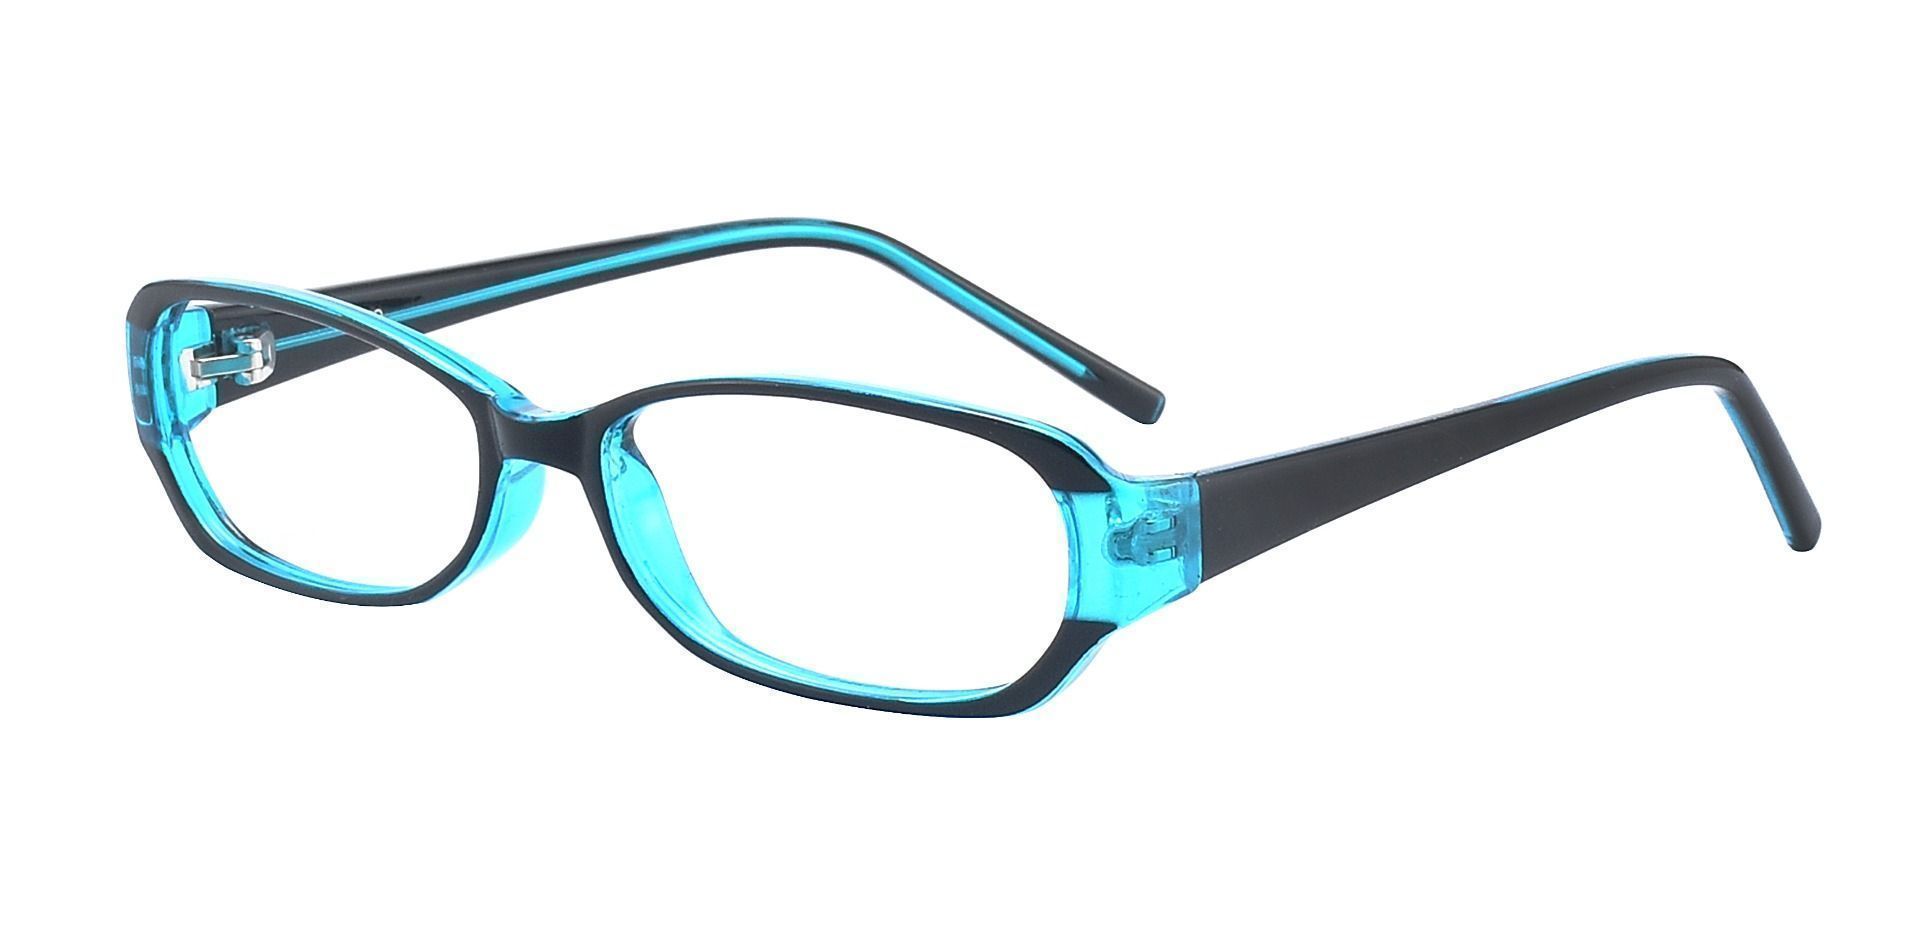 Nairobi Oval Single Vision Glasses - The Frame Is Black And Blue